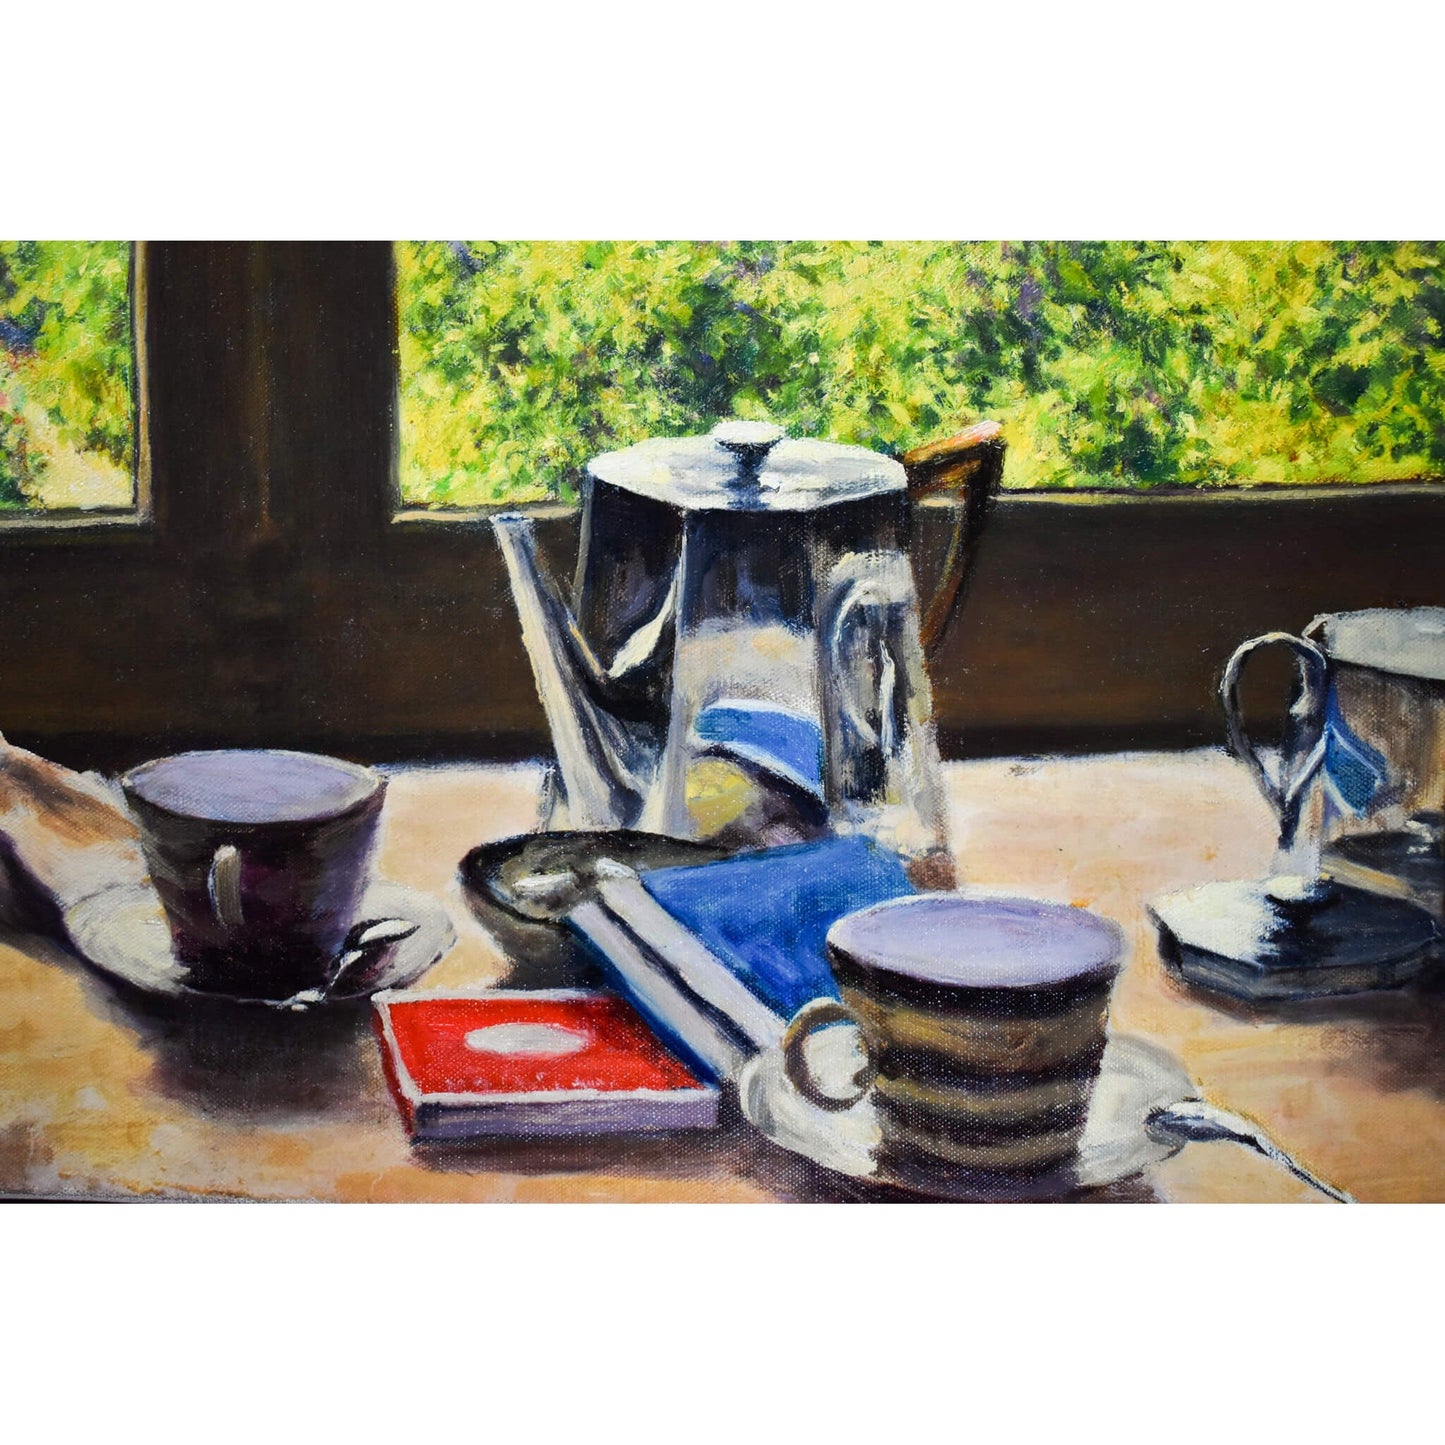 Vintage oil painting still life with a coffee set, made in 1960 by Marguerite Lorentz, for sale at Winckelmann Gallery.